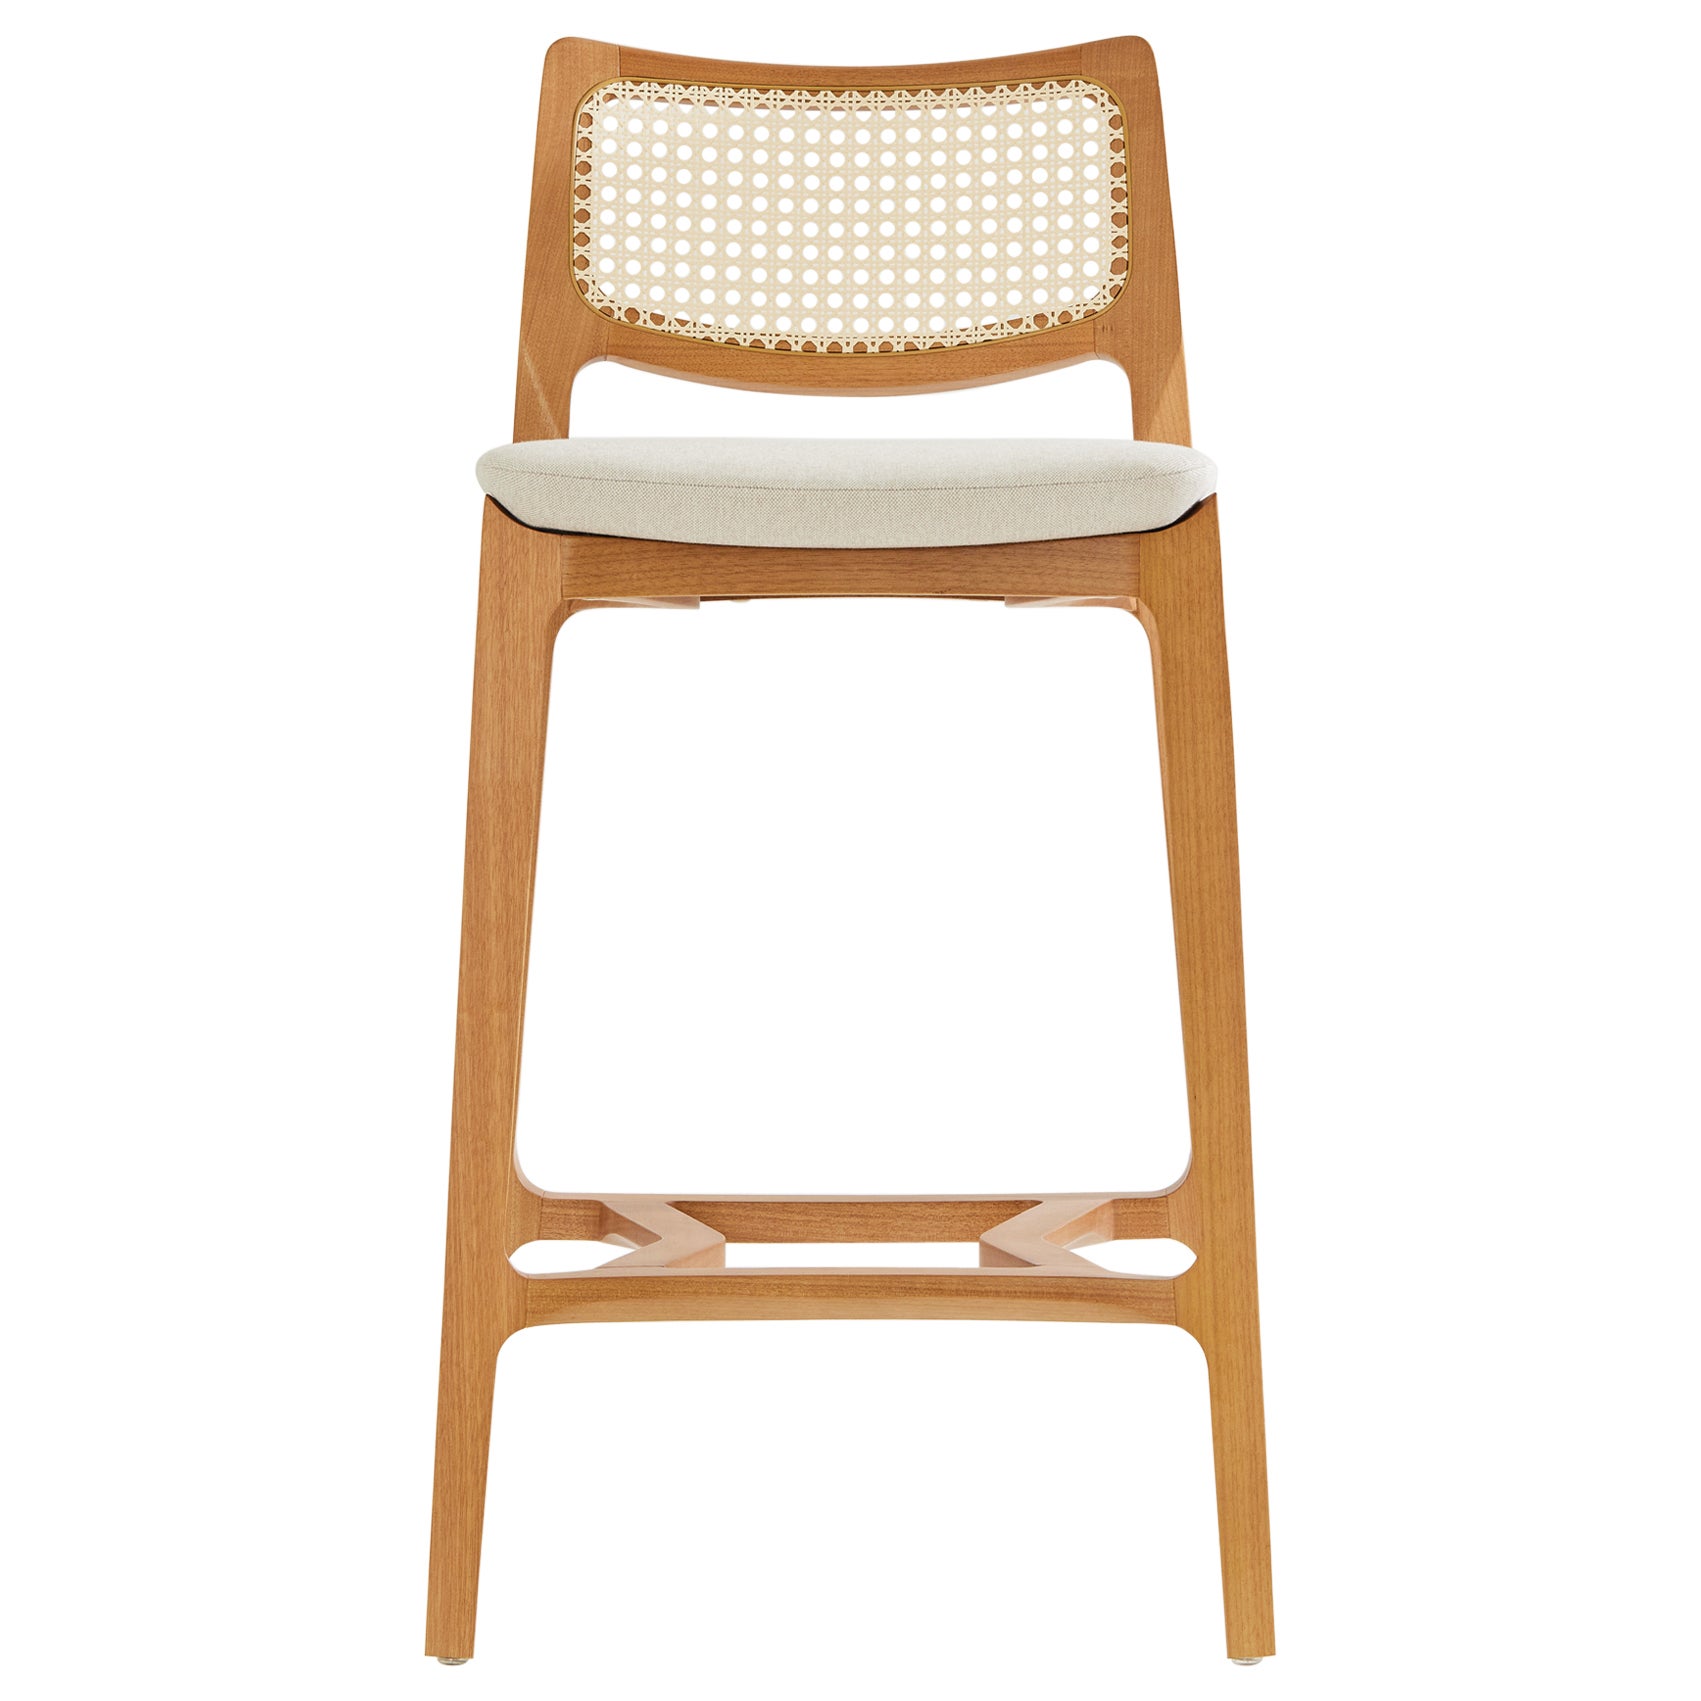 Aurora stool, light honey solid wood, natural caning back, cream textile seating